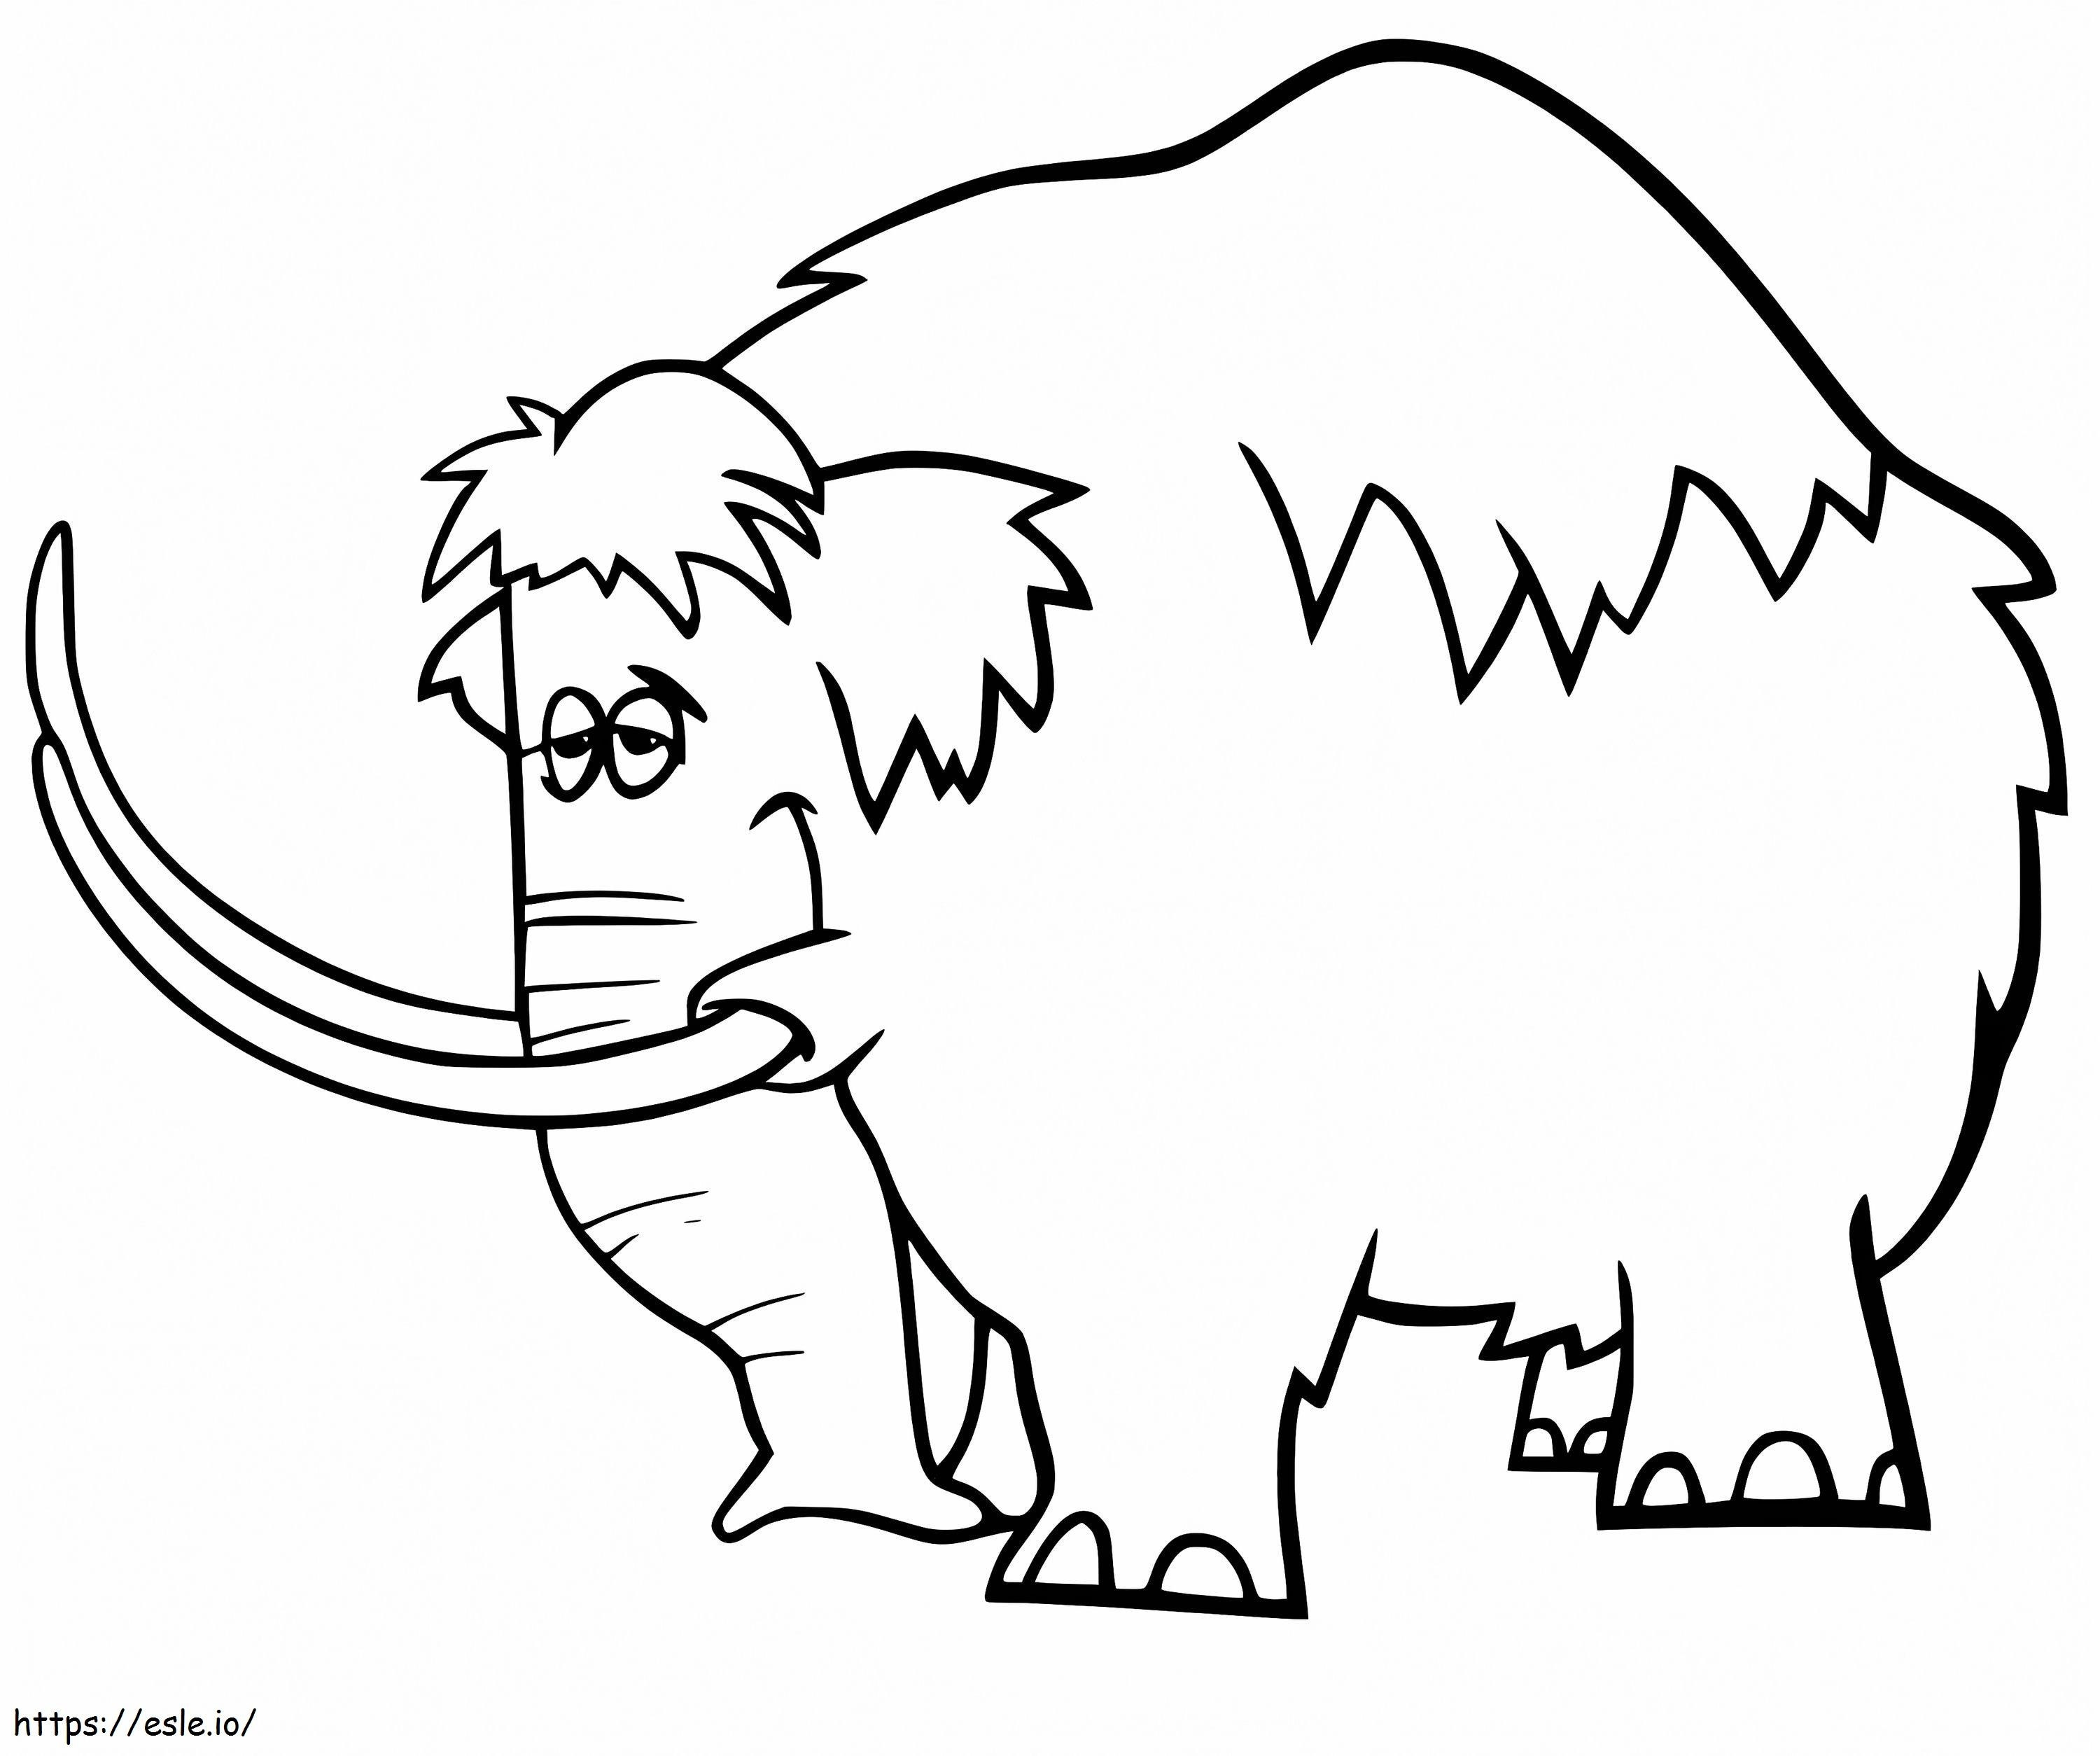 Mammoth 2 coloring page